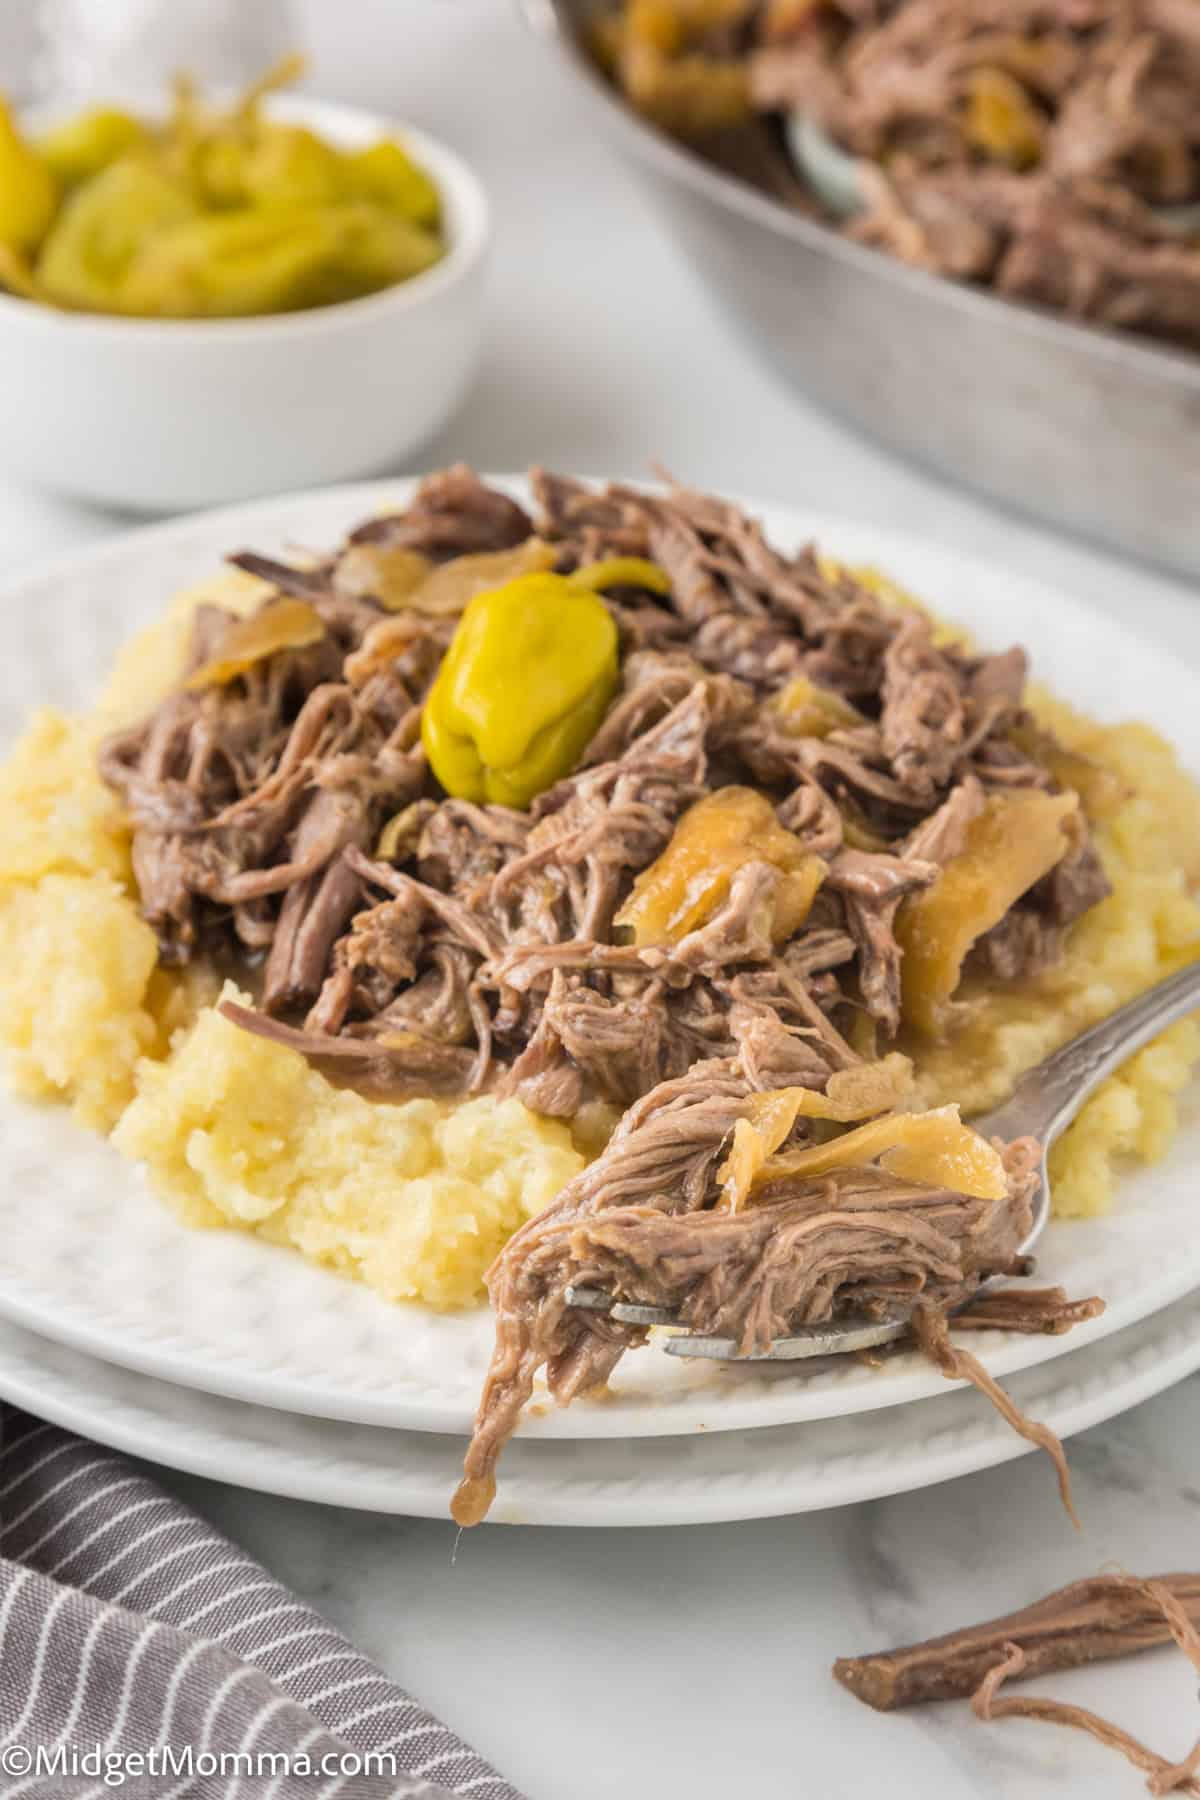 A plate of shredded mississippi pot roast beef served on mashed potatoes with peppers on top. A fork rests beside the dish.